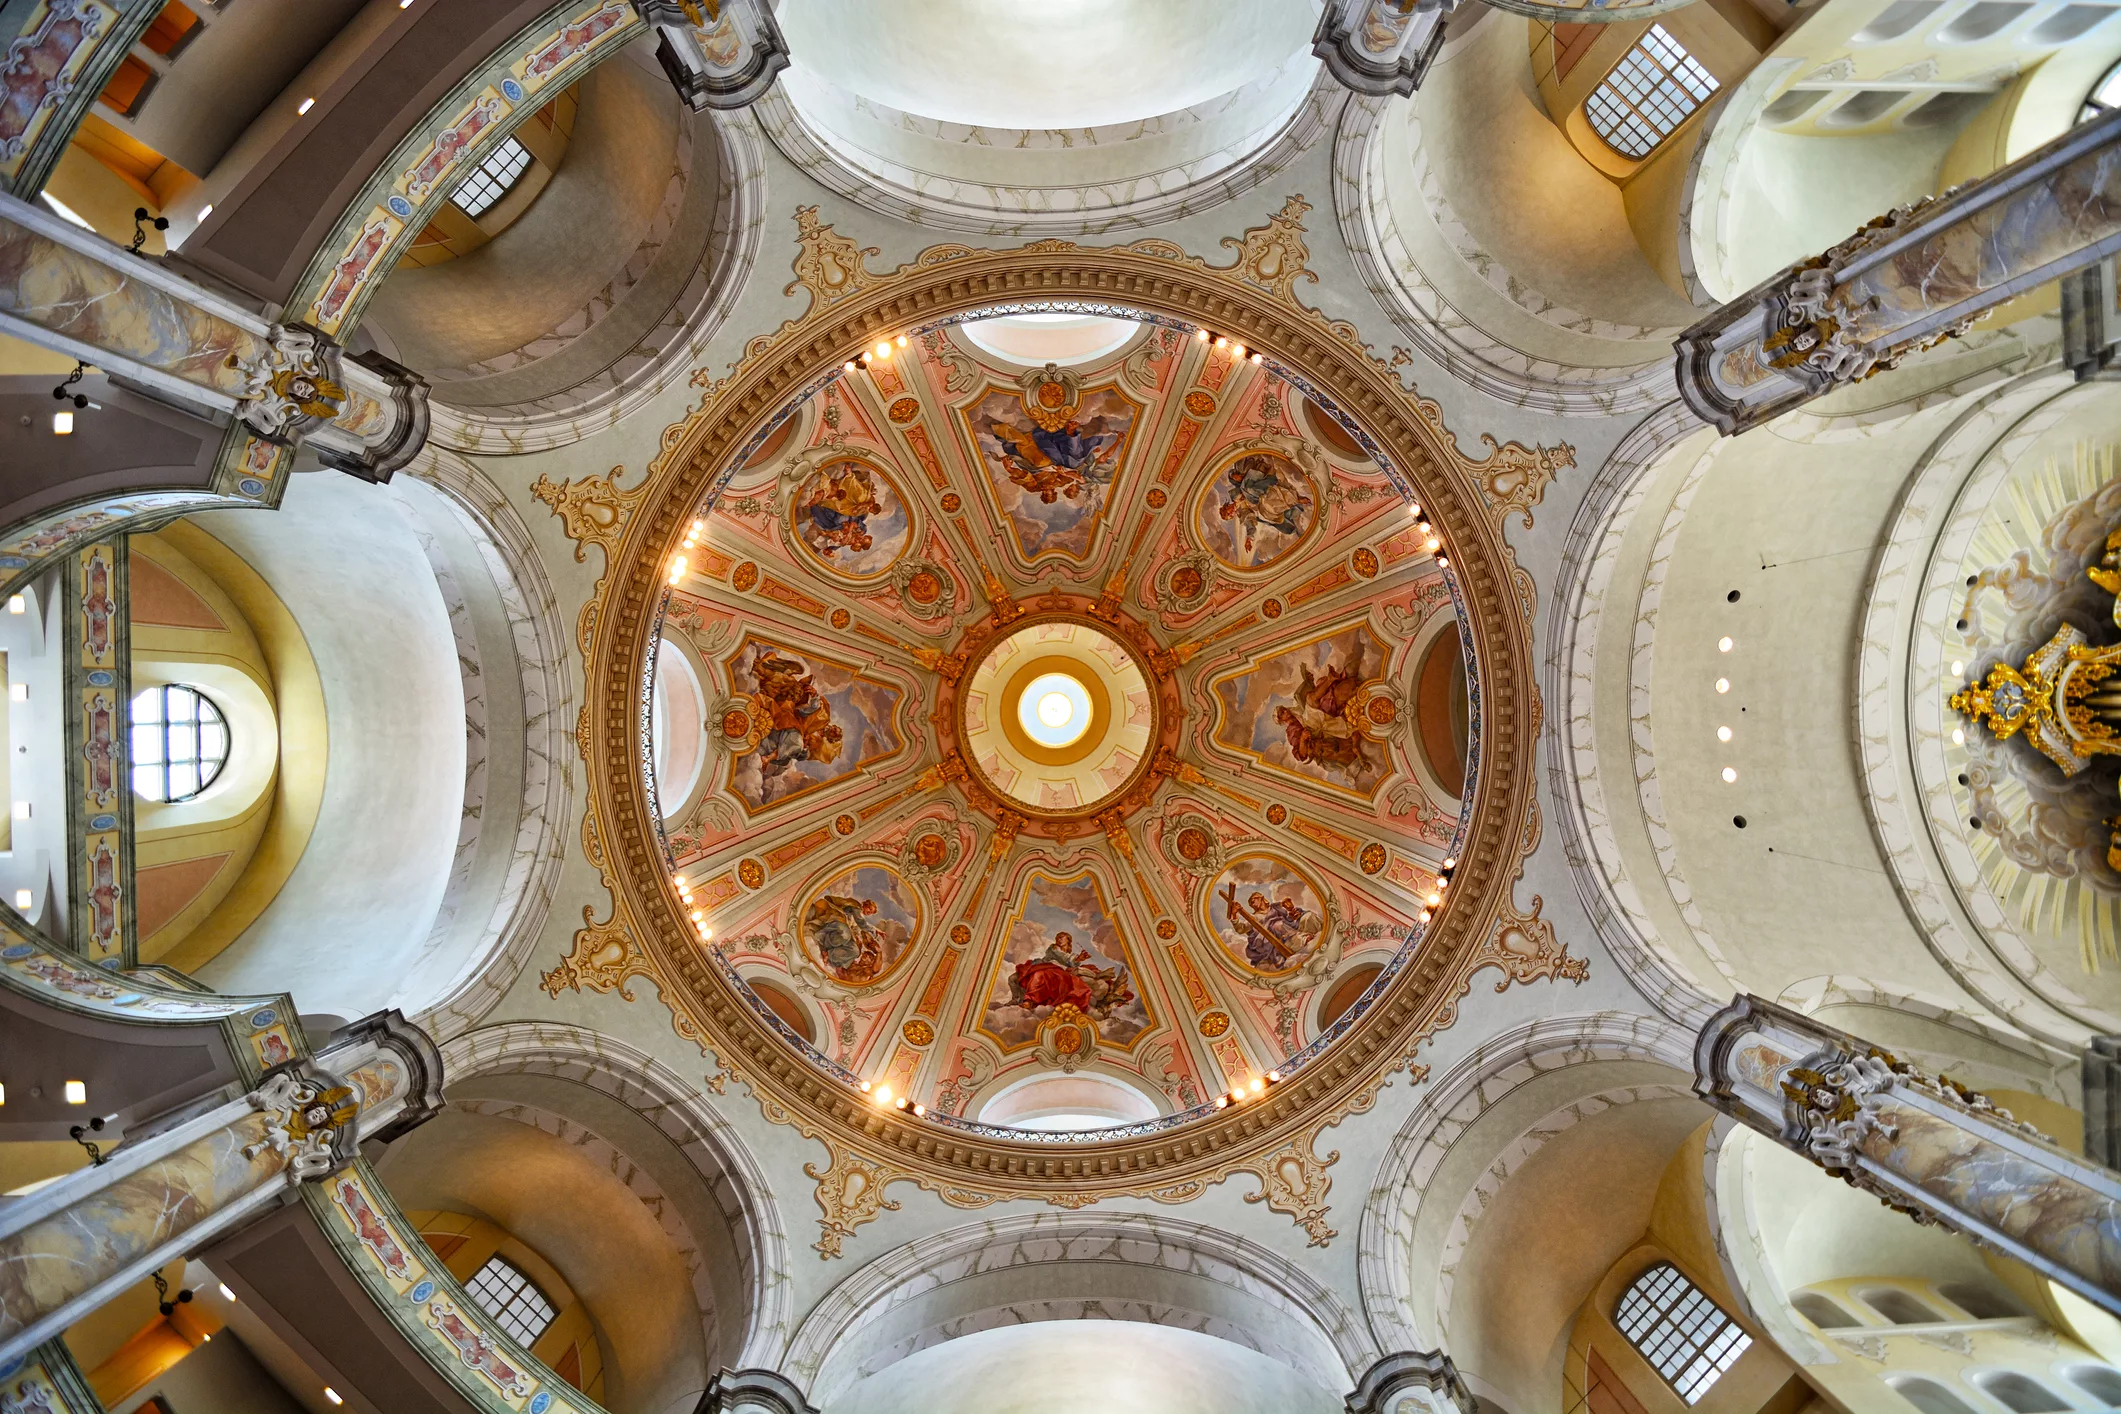 View of the ornate dome of the Frauenkirche Cathedral situated in Dresden, Germany.